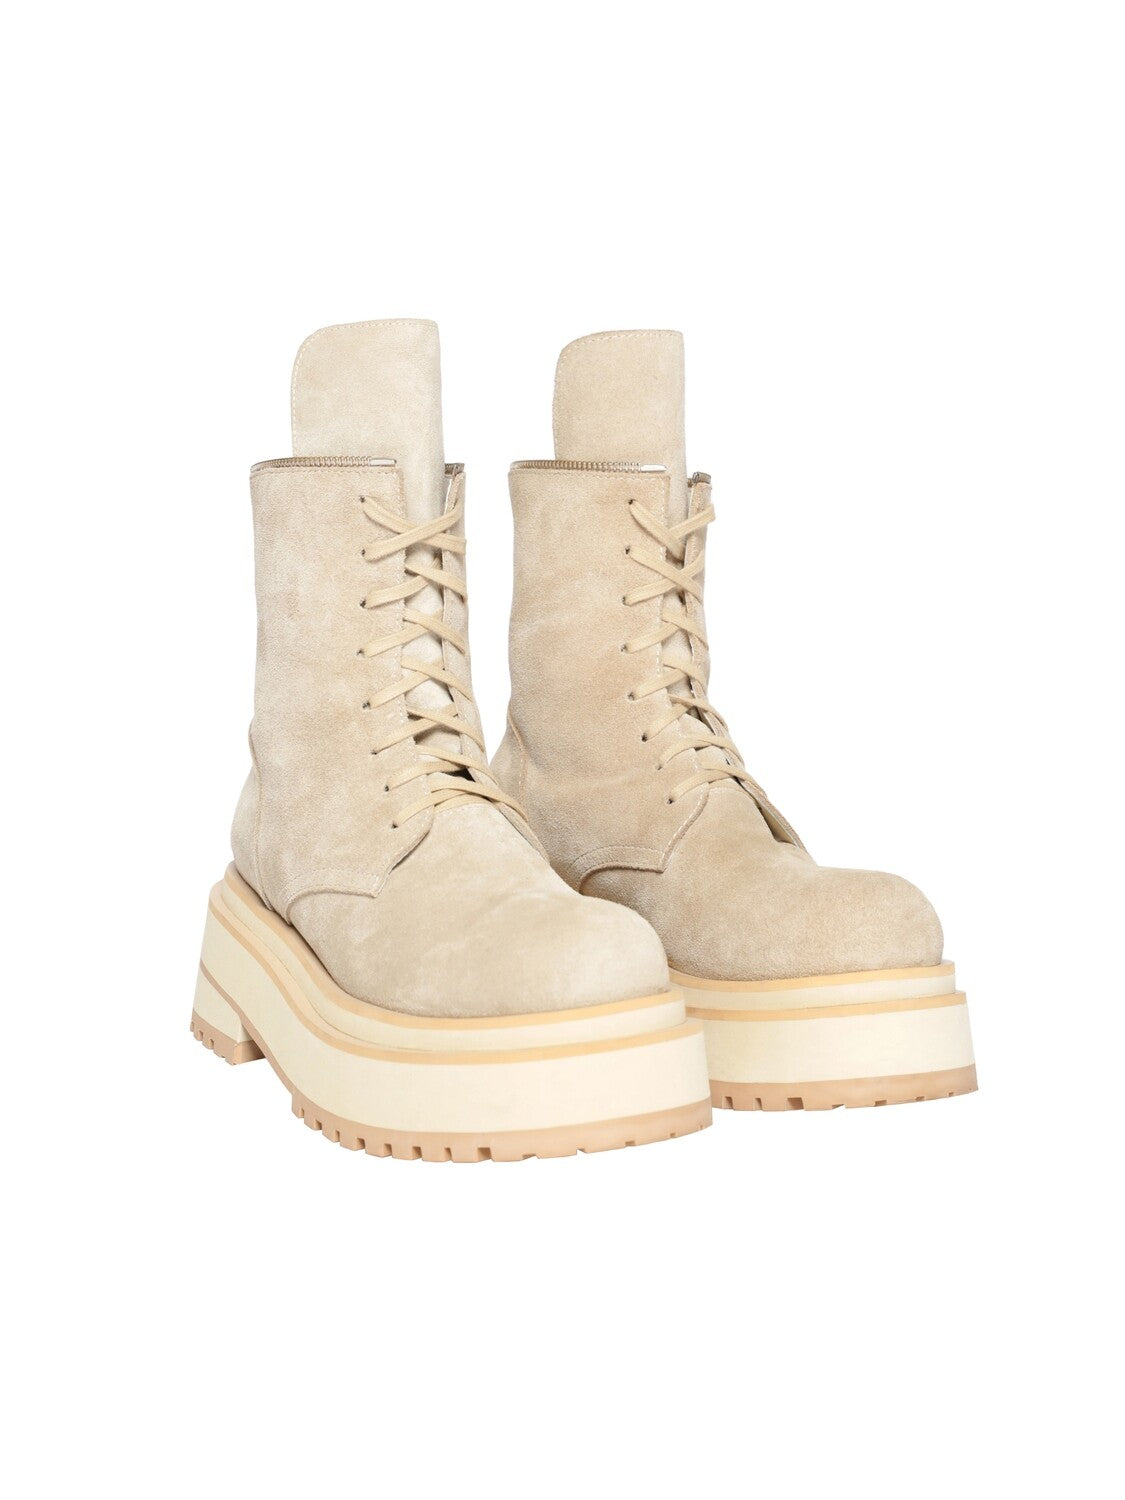 Boots transformers beige, 1st height